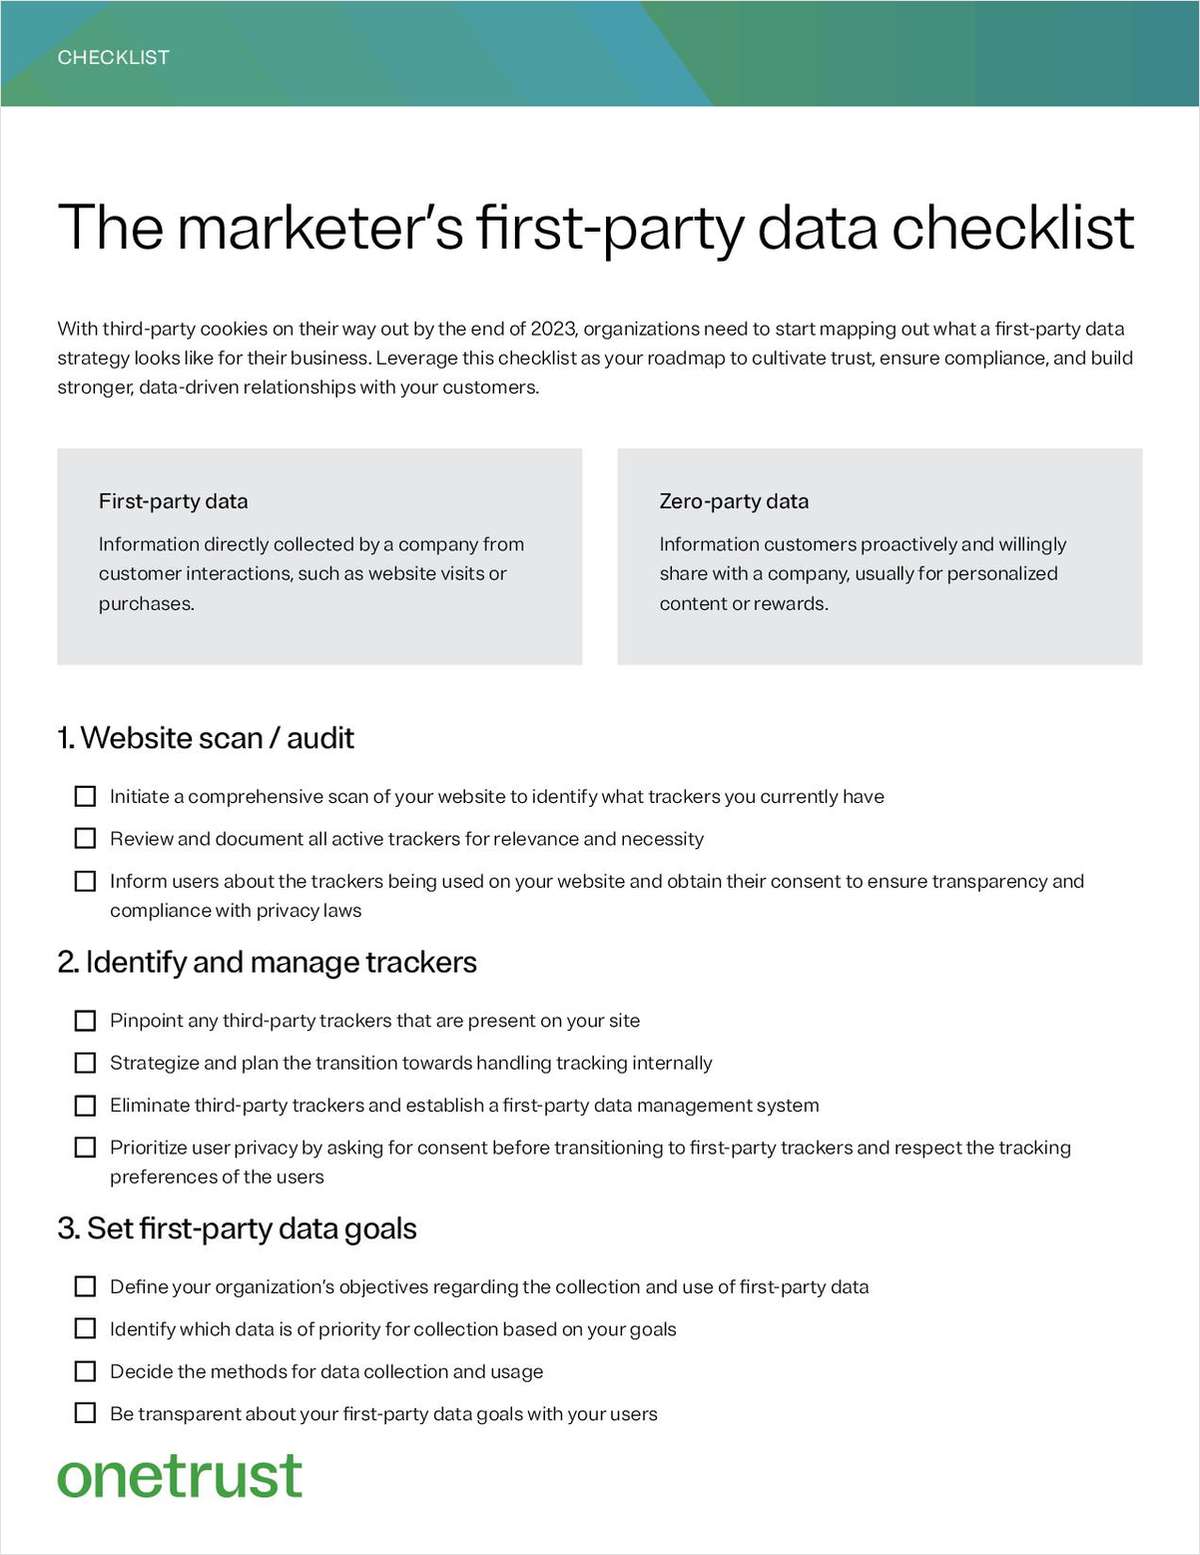 The Marketers First-Party Data Checklist